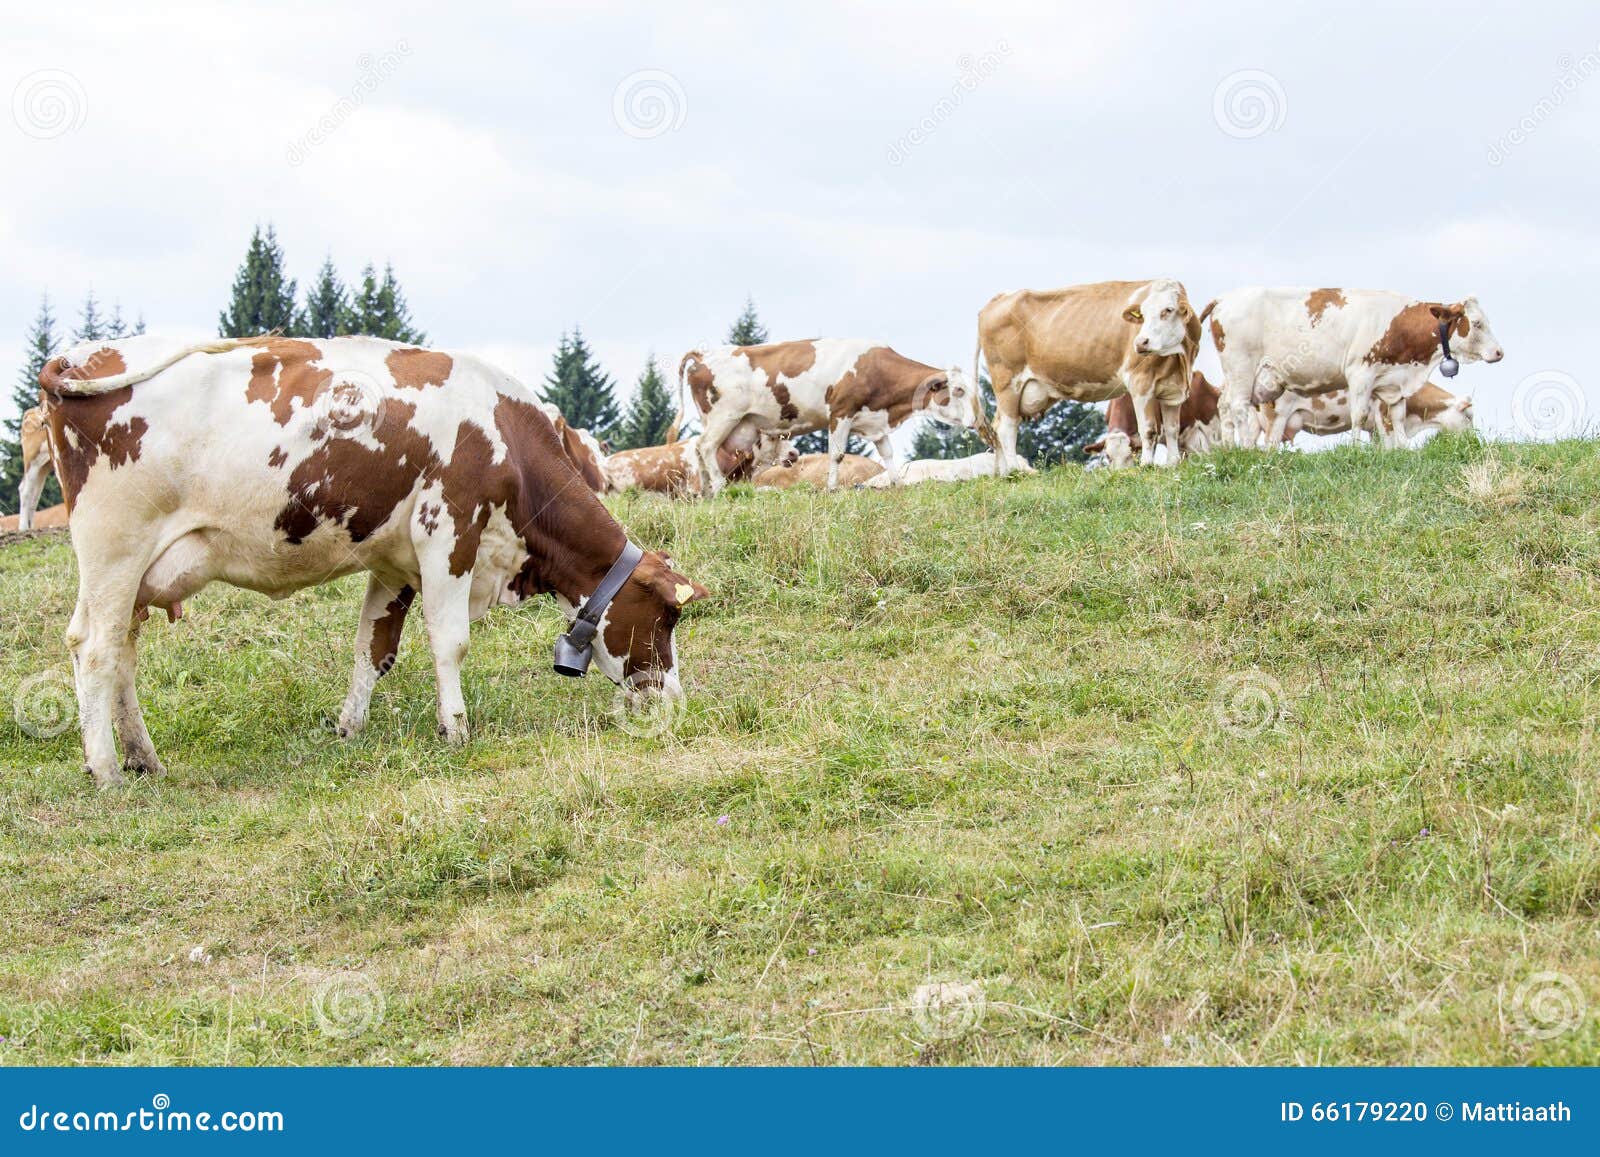 Alpine pasture with cows grazing. An alpine pasture in North Italy with herd of cows grazing